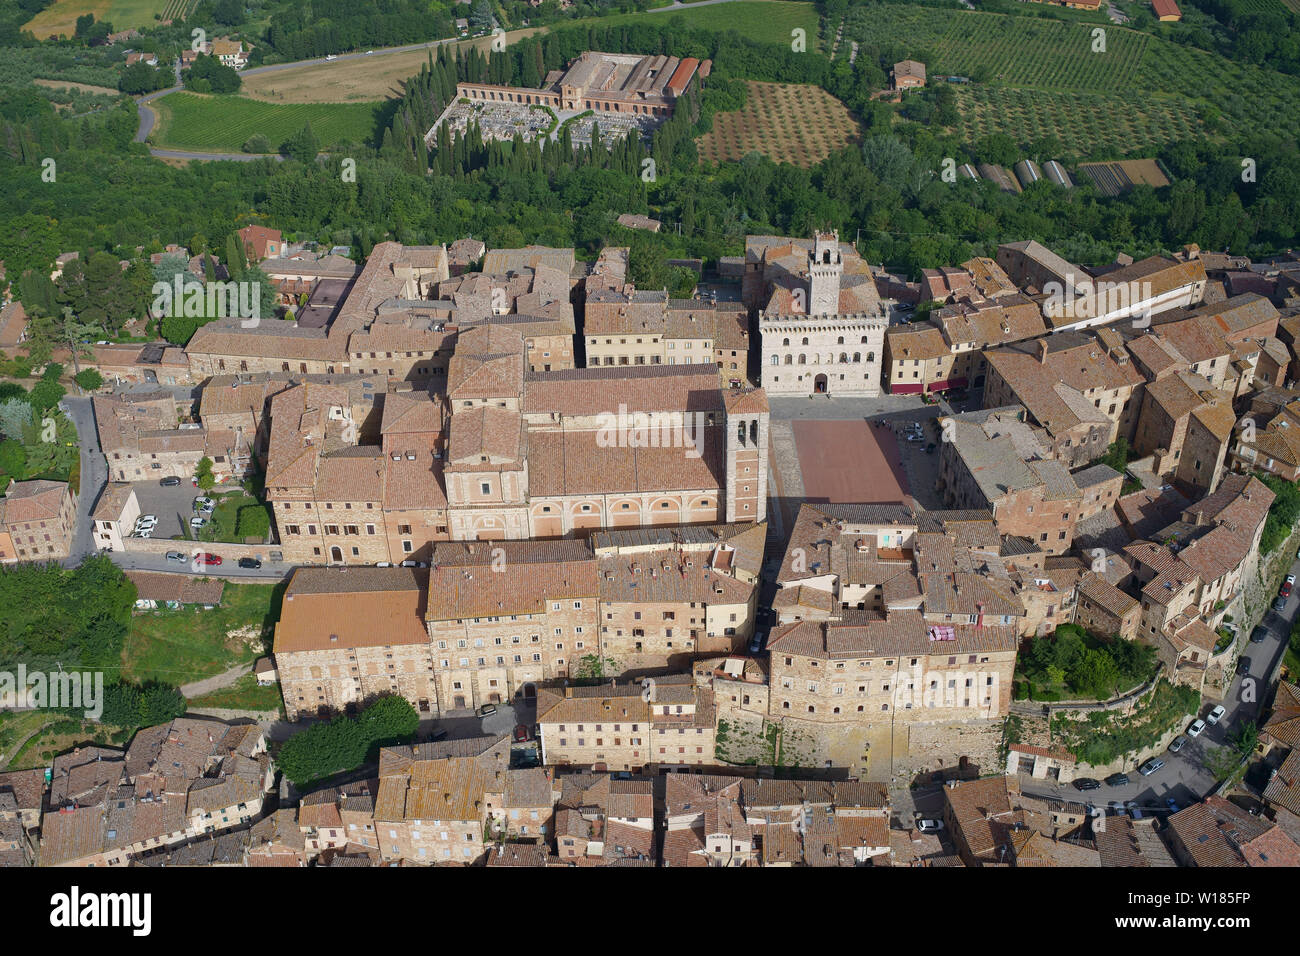 AERIAL VIEW. The town hall and other historic buildings around the Piazza Grande in the city of Montepulciano. Province of Siena, Tuscany, Italy. Stock Photo